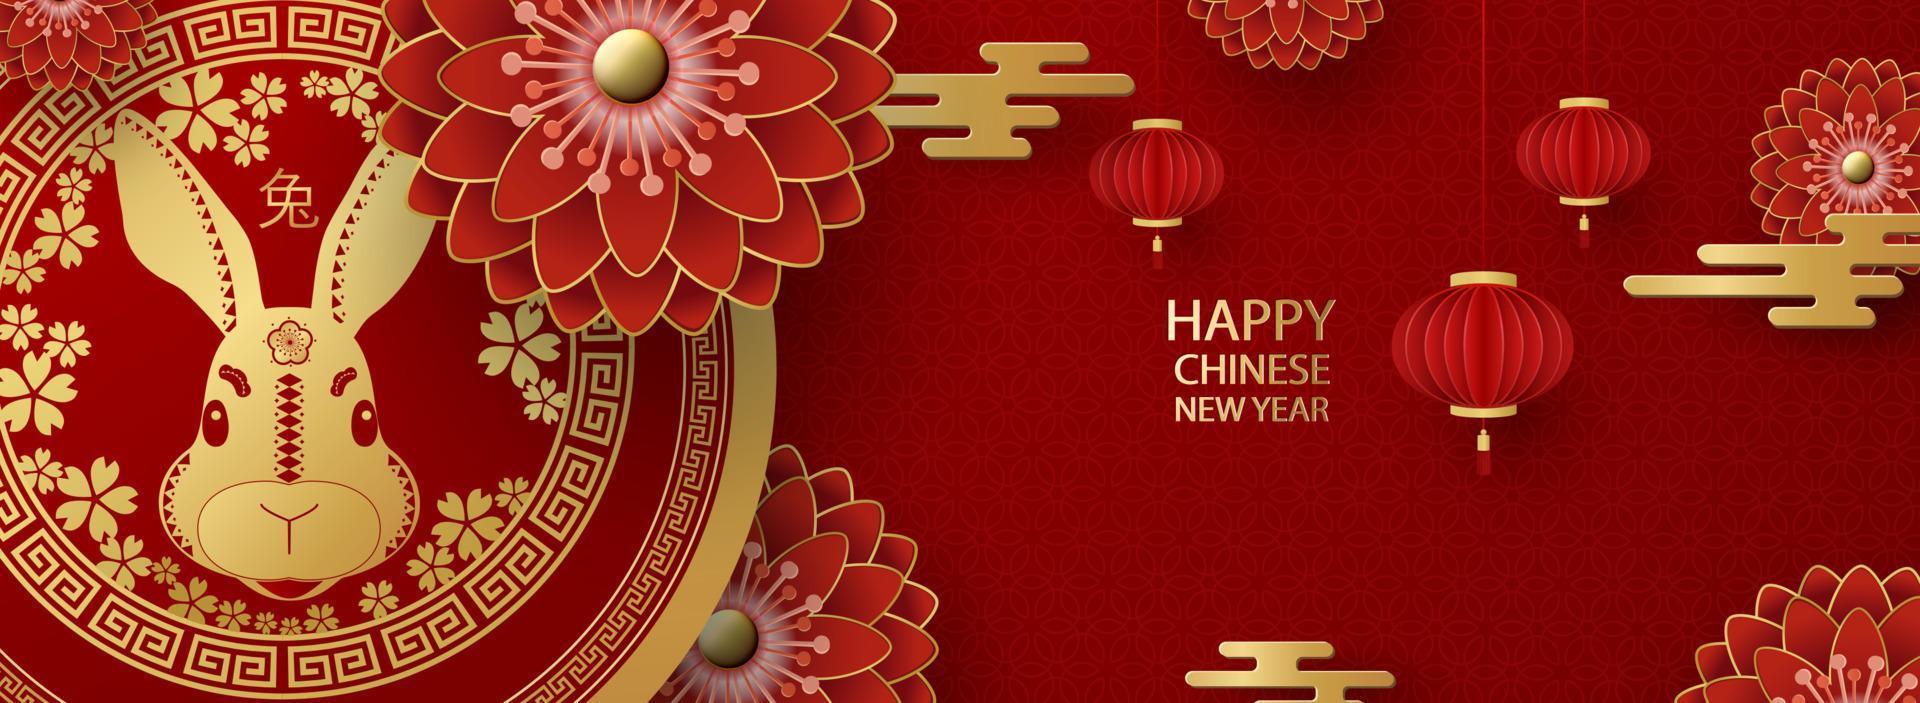 Happy new year 2023 banner in chinese design Vector Image